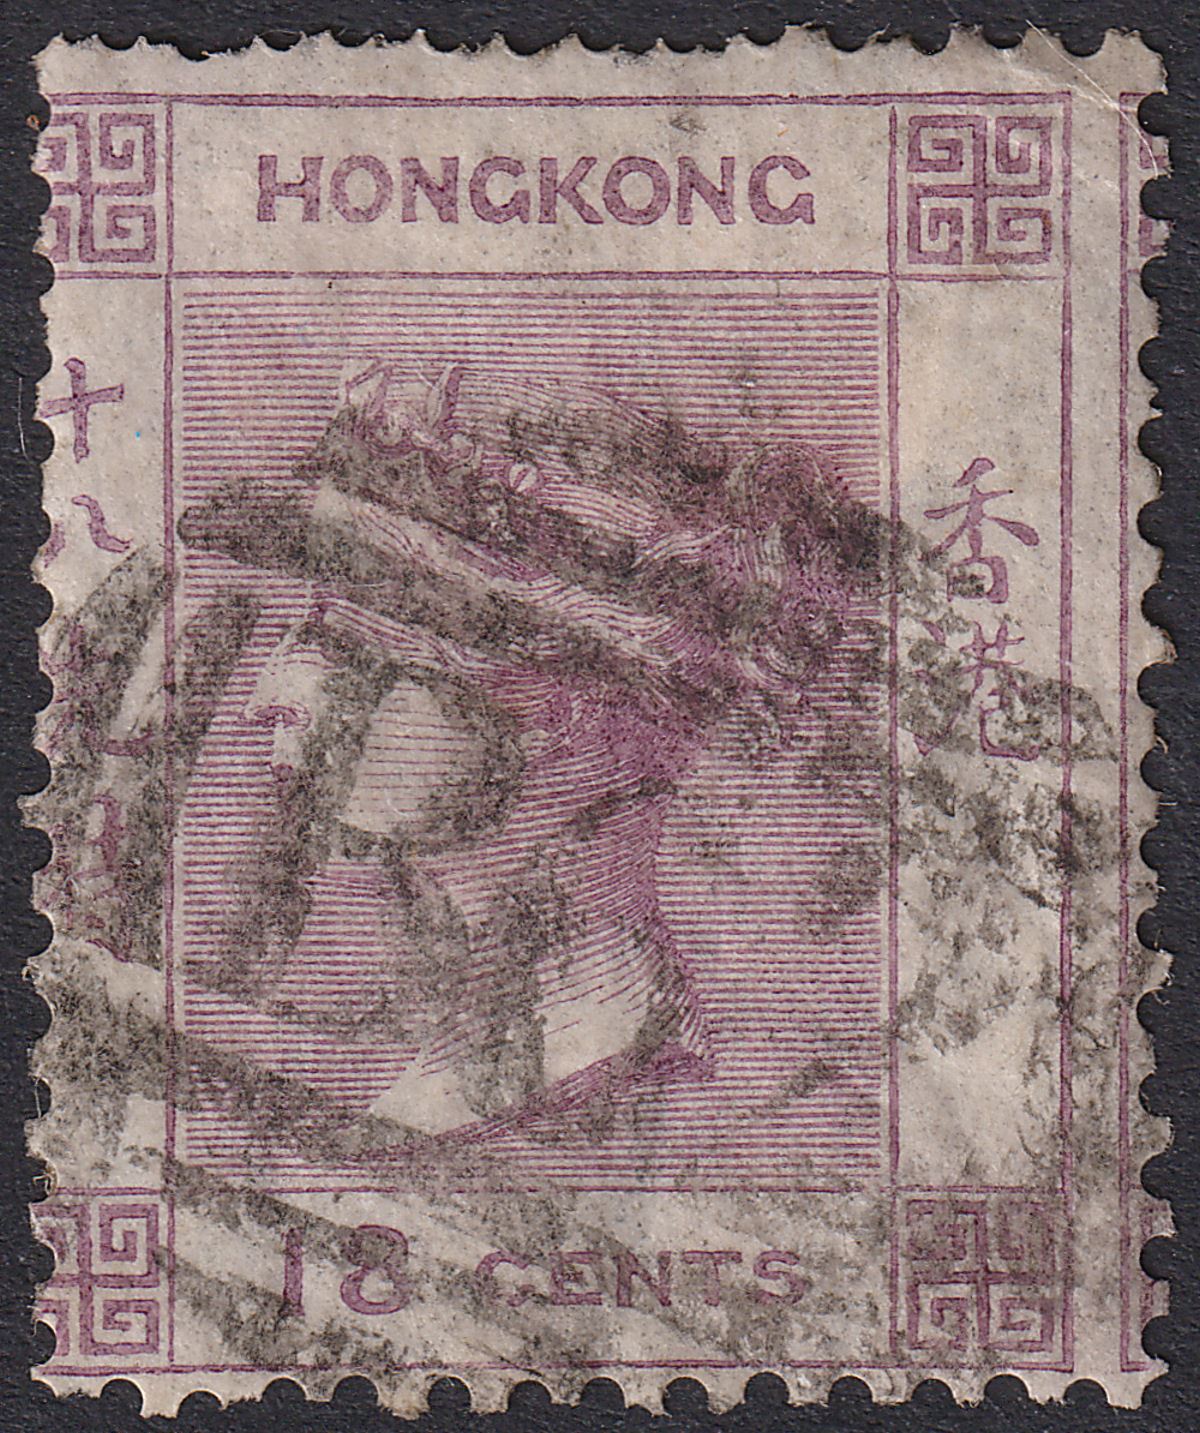 Hong Kong 1866 QV 18c Lilac Used SG13 cat £300 with perf faults